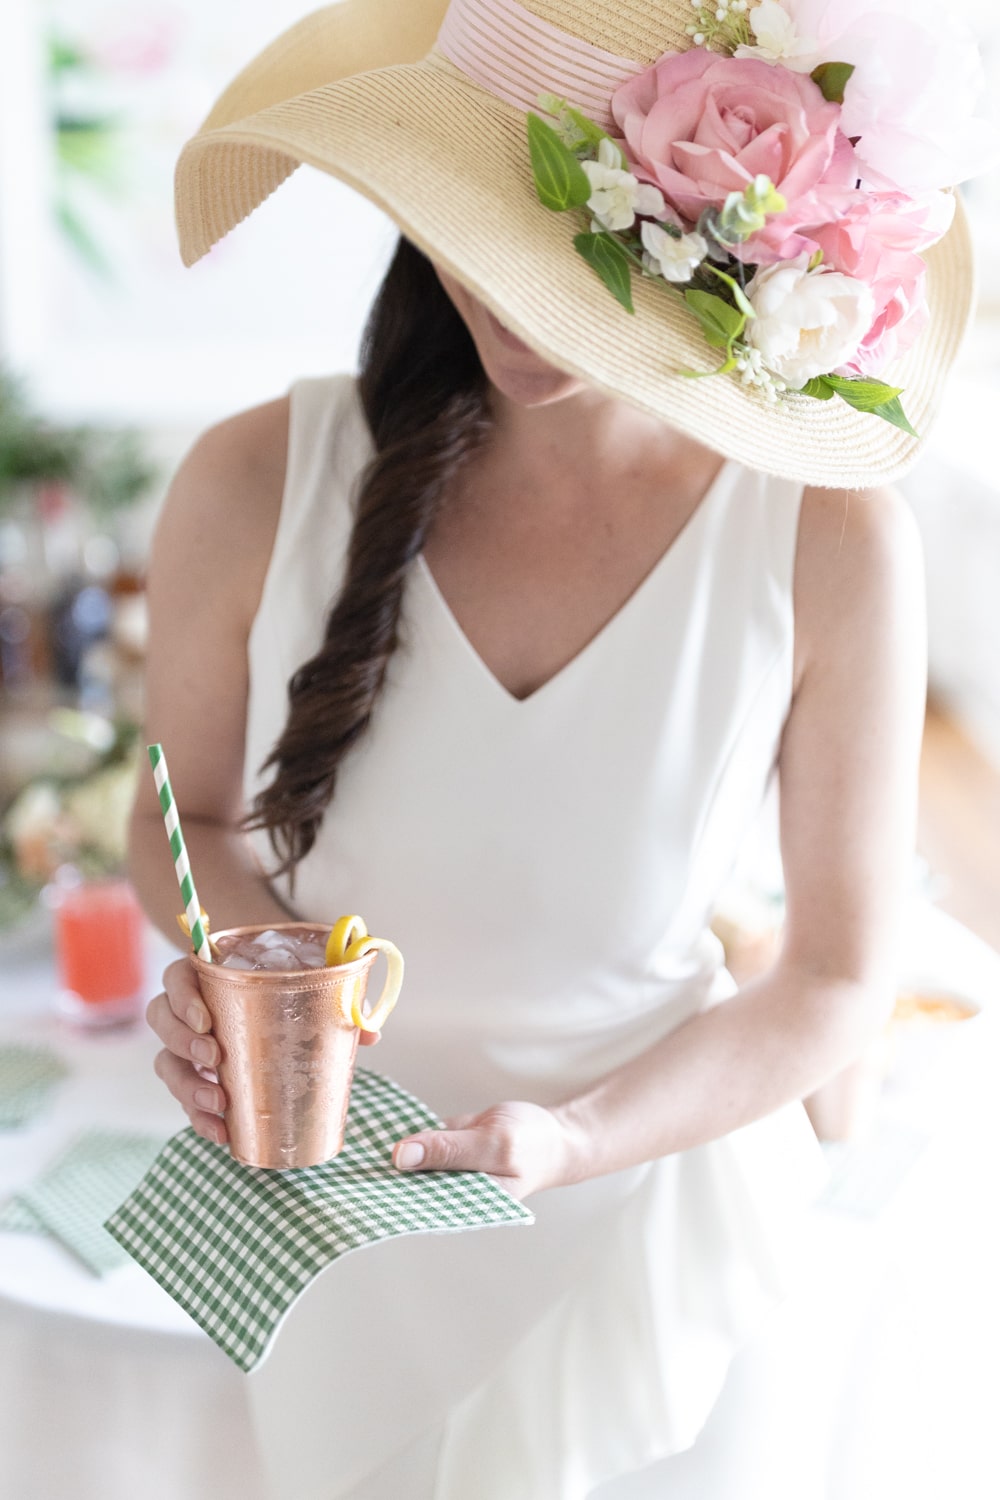 Woodford Spire cocktail prepared in a copper mint julep cup by southern blogger Stephanie Ziajka on Diary of a Debutante